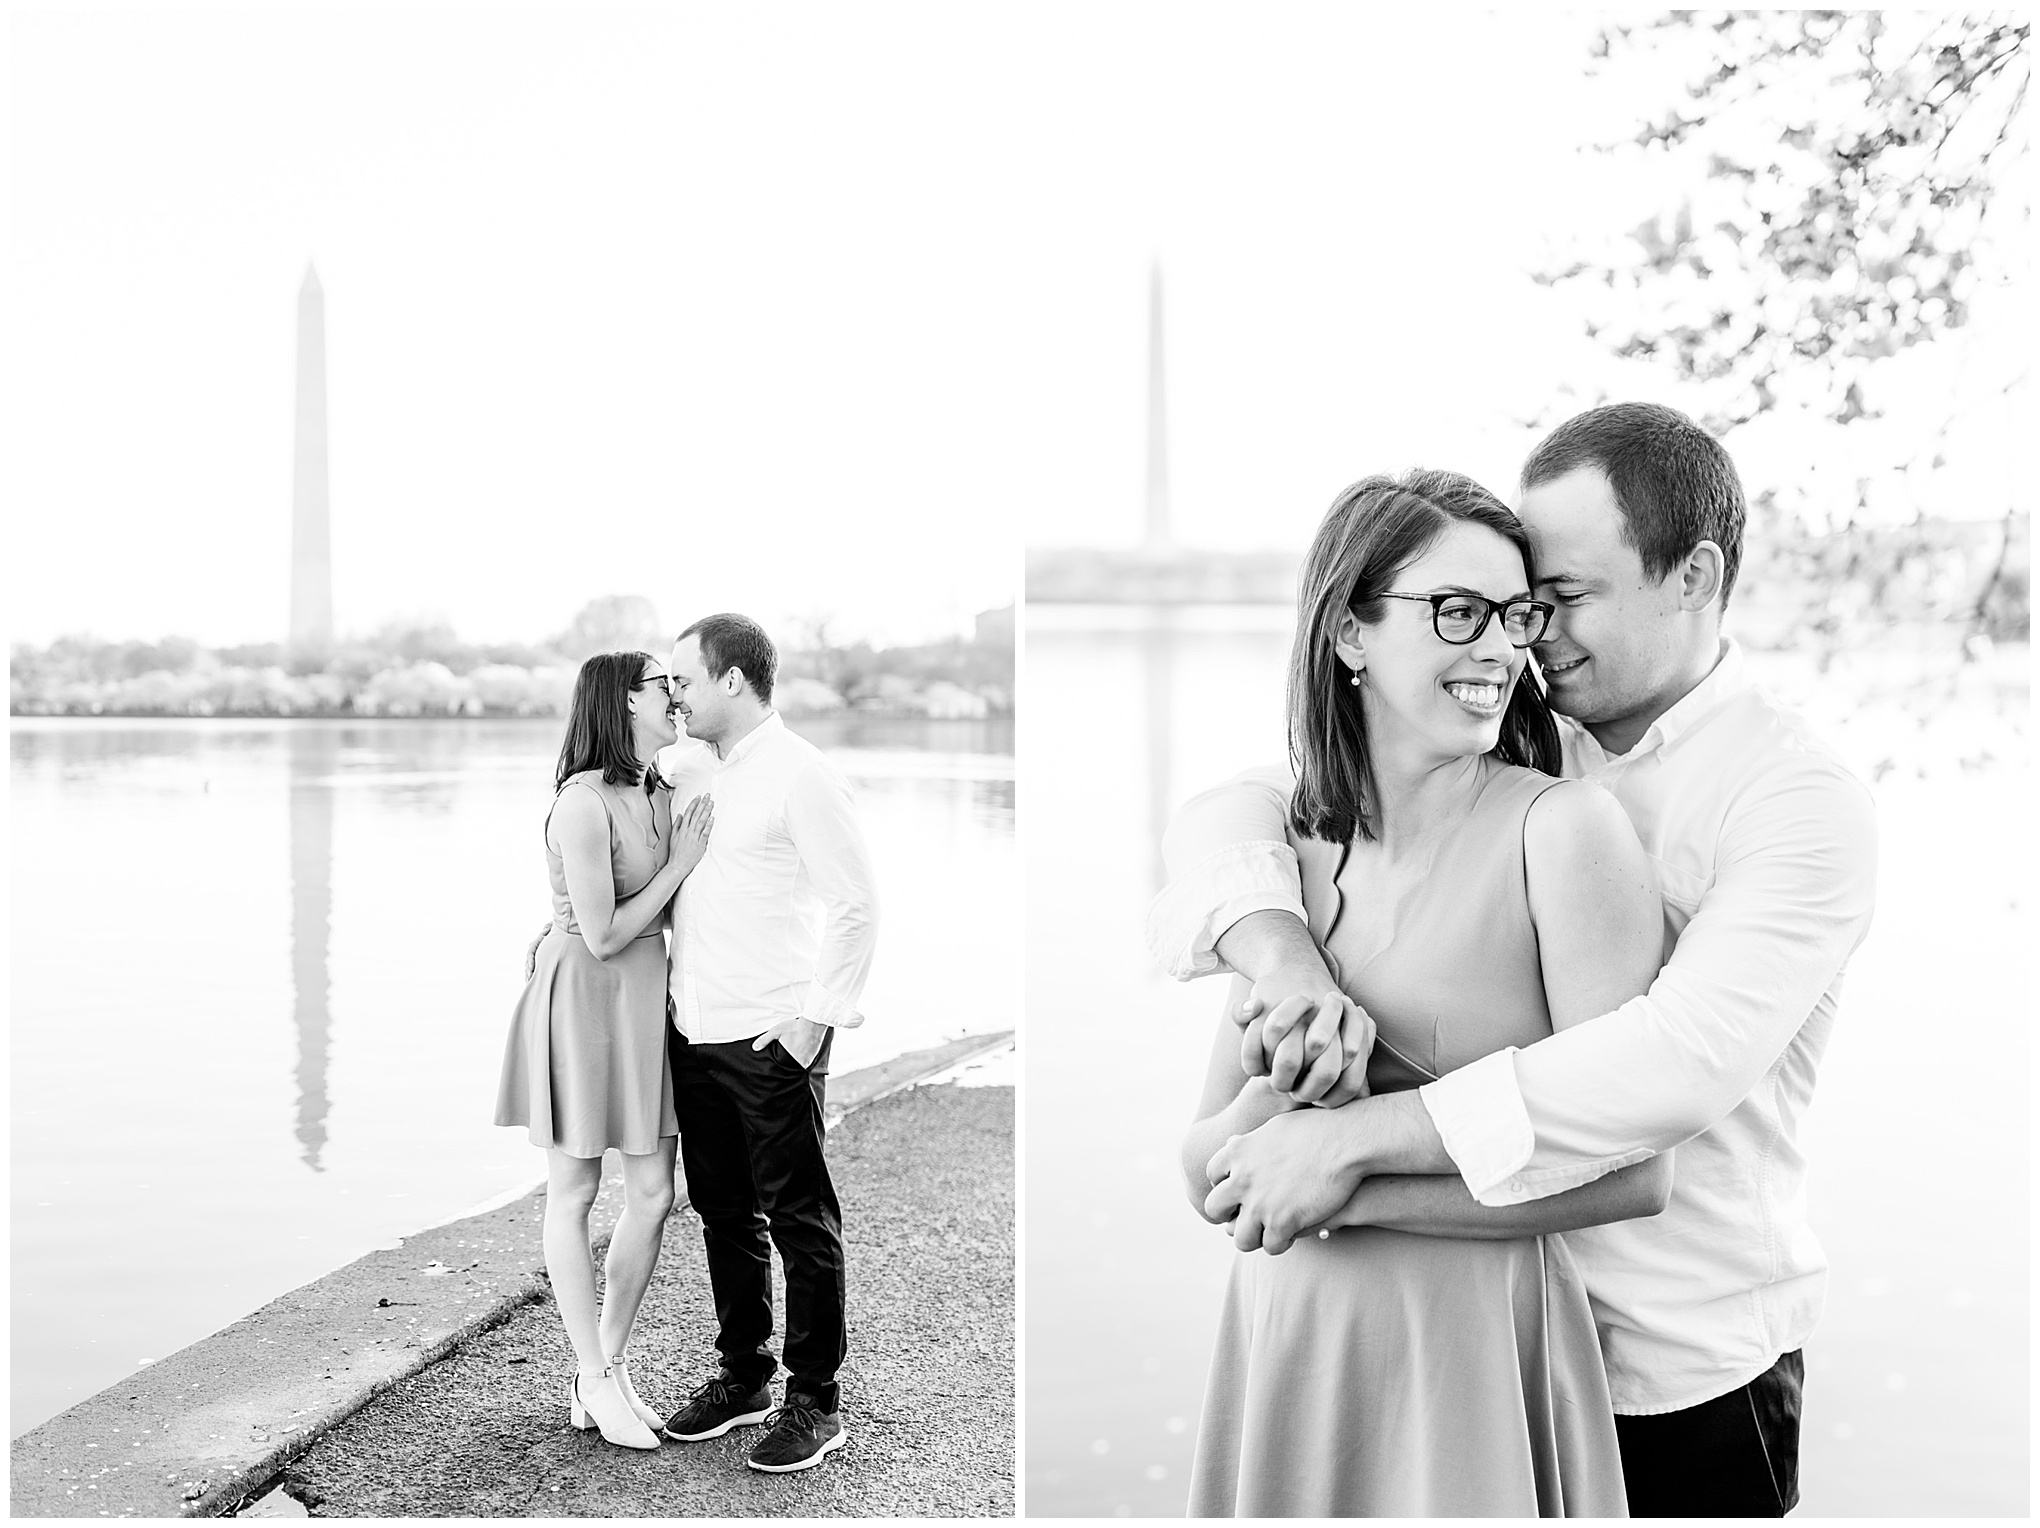 sunny cherry blossoms engagement session, Washington, D.C. engagement photos, Washington D.C. engagement photos, sunrrise engagement photos, cherry blossom engagement photos, D.C. cherry bloossoms, D.C. cherry blossoms photos, cherry blossom photos, cherry blossoms portrraits, sunny engagement photos, classic engagement photos, Rachel E.H. Photography, engagement session style, black and white engagement photos